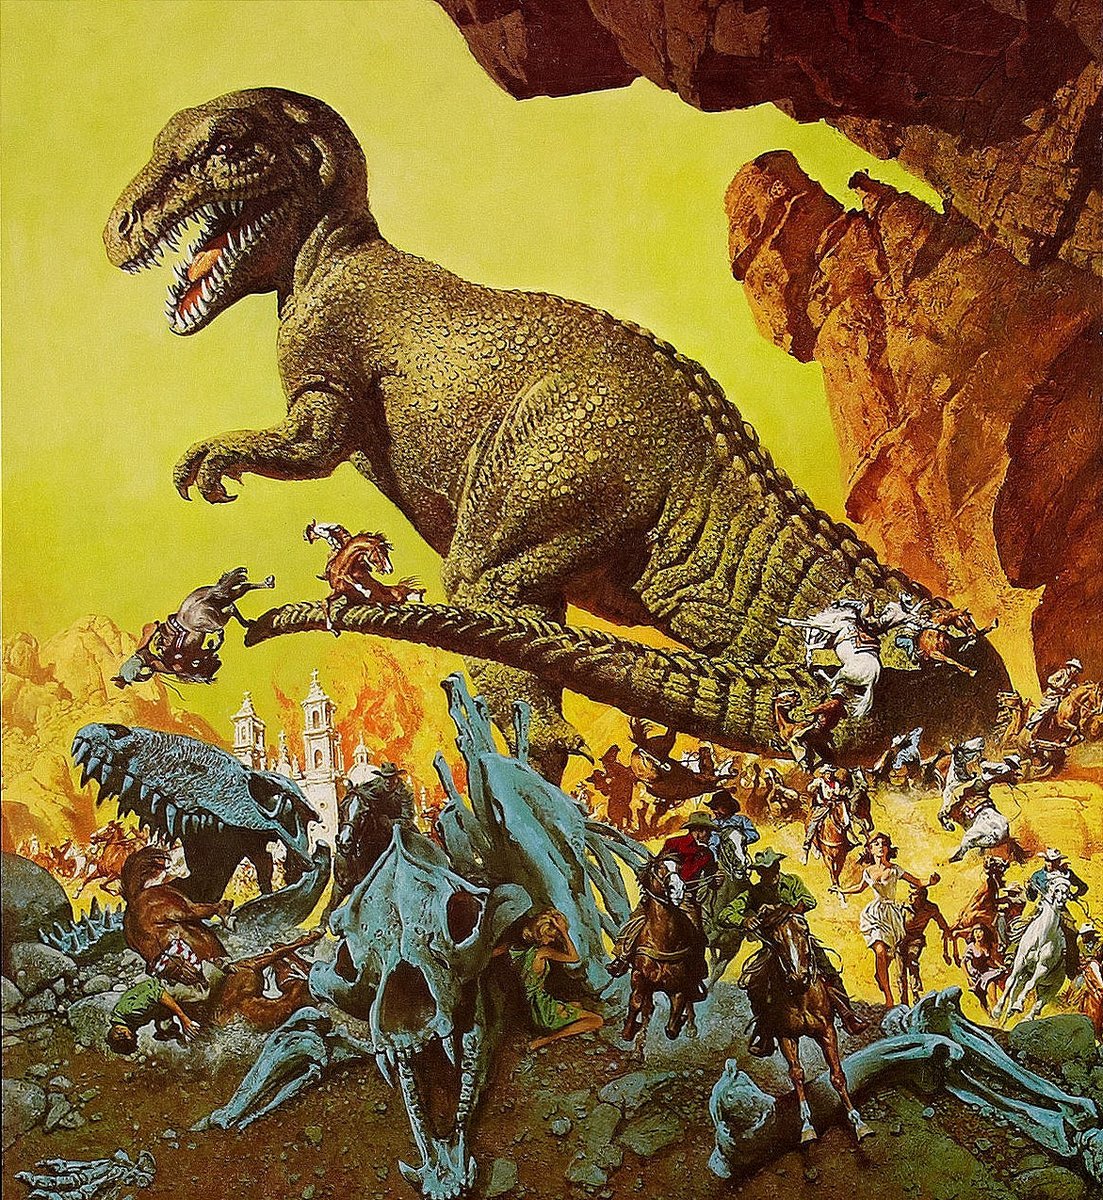 Western mashups (sci-fi western, horror western, etc) seldom work. BUT, there is a crackerjack movie about a dinosaur captured by a #WildWest Show called #ValleyofGwangi with terrific #stopmotion #animation by the legendary #RayHarryhausen. 

If you haven't seen this movie, do!